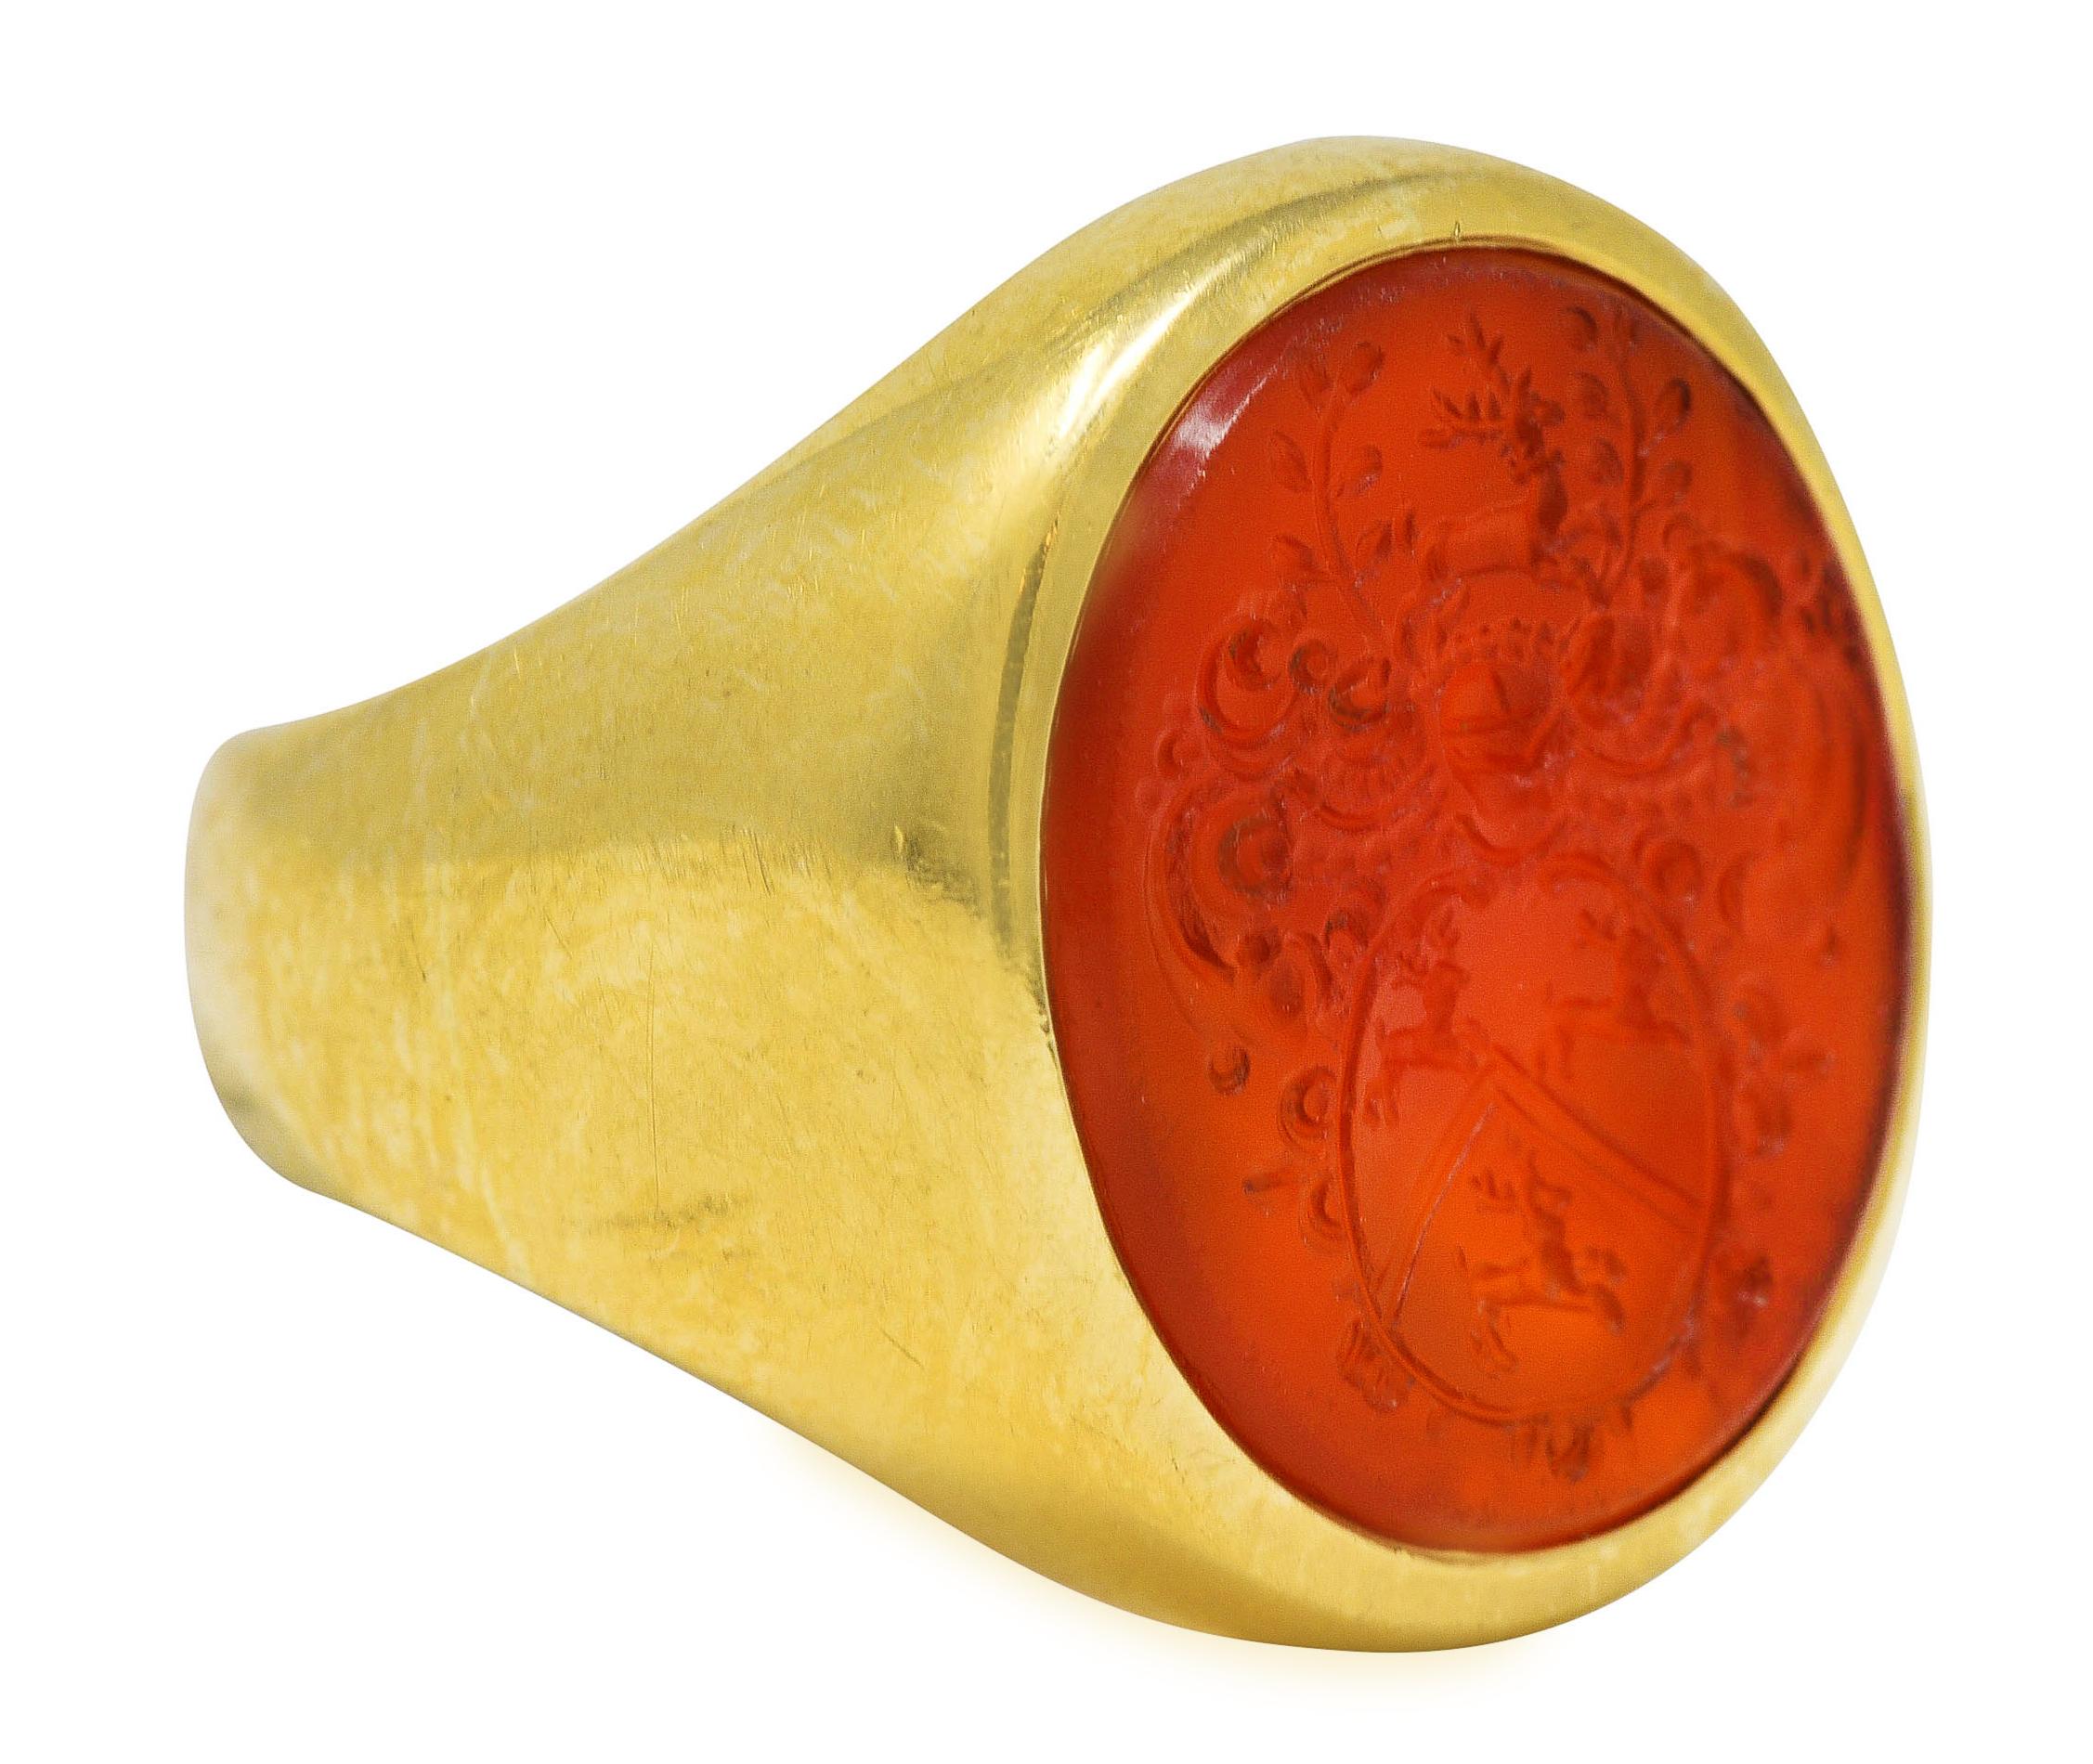 Ring centers a flush set oval carnelian tablet measuring 12.0 x 14.0 mm - translucent medium reddish orange. With intaglio carved to depict the Oxford Jesus College crest - featuring a shield with three stags. Accented by scrolling foliate motifs.